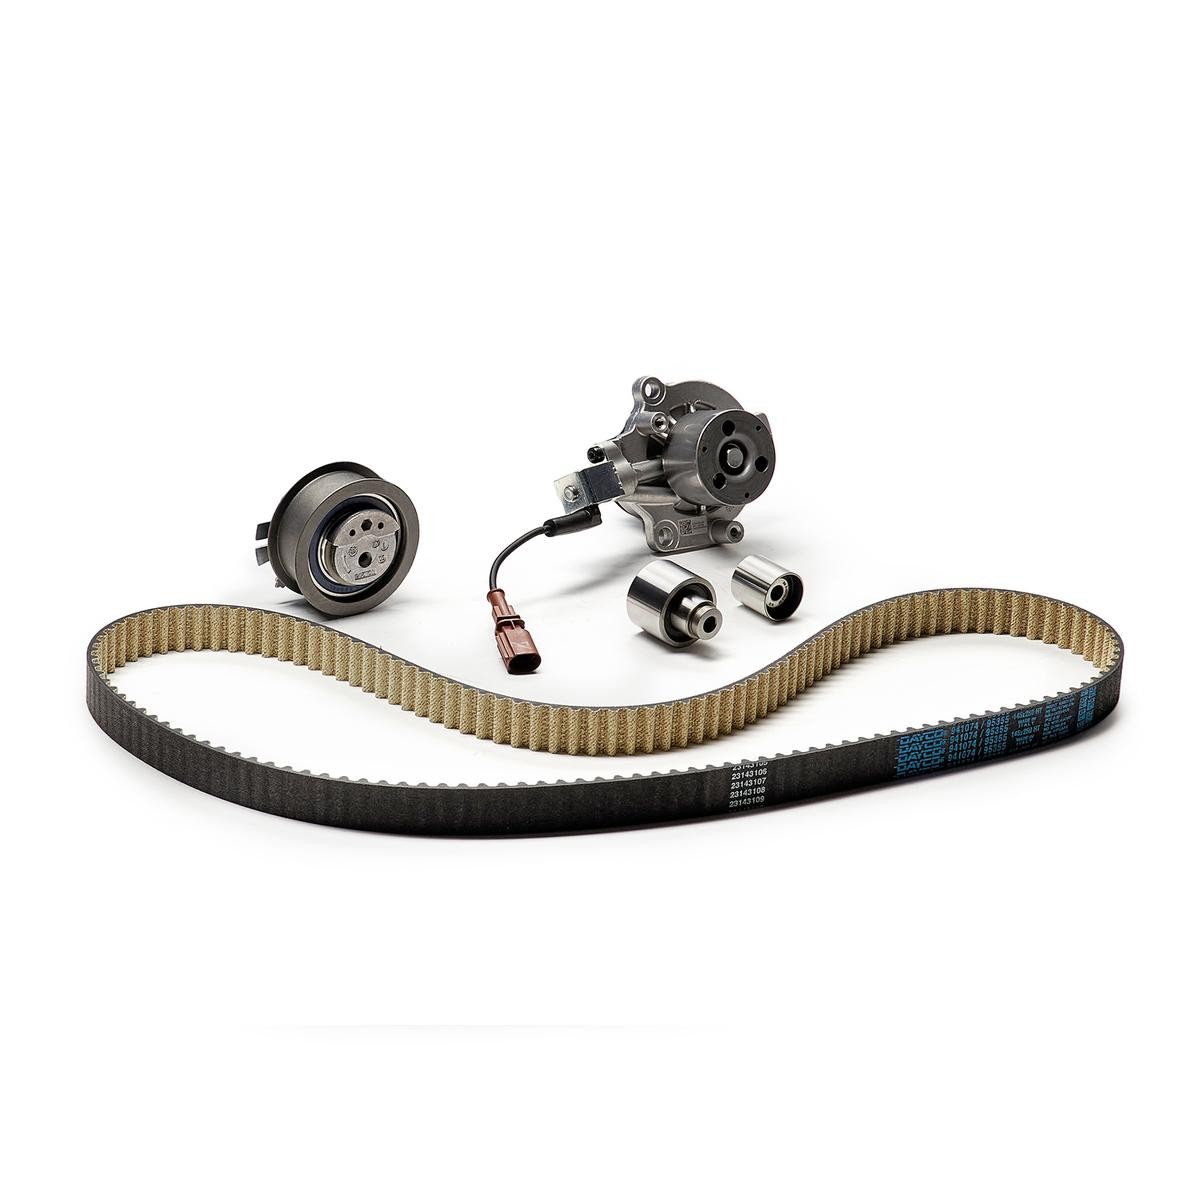 DAYCO Water pump and timing belt kit KTBWP8841